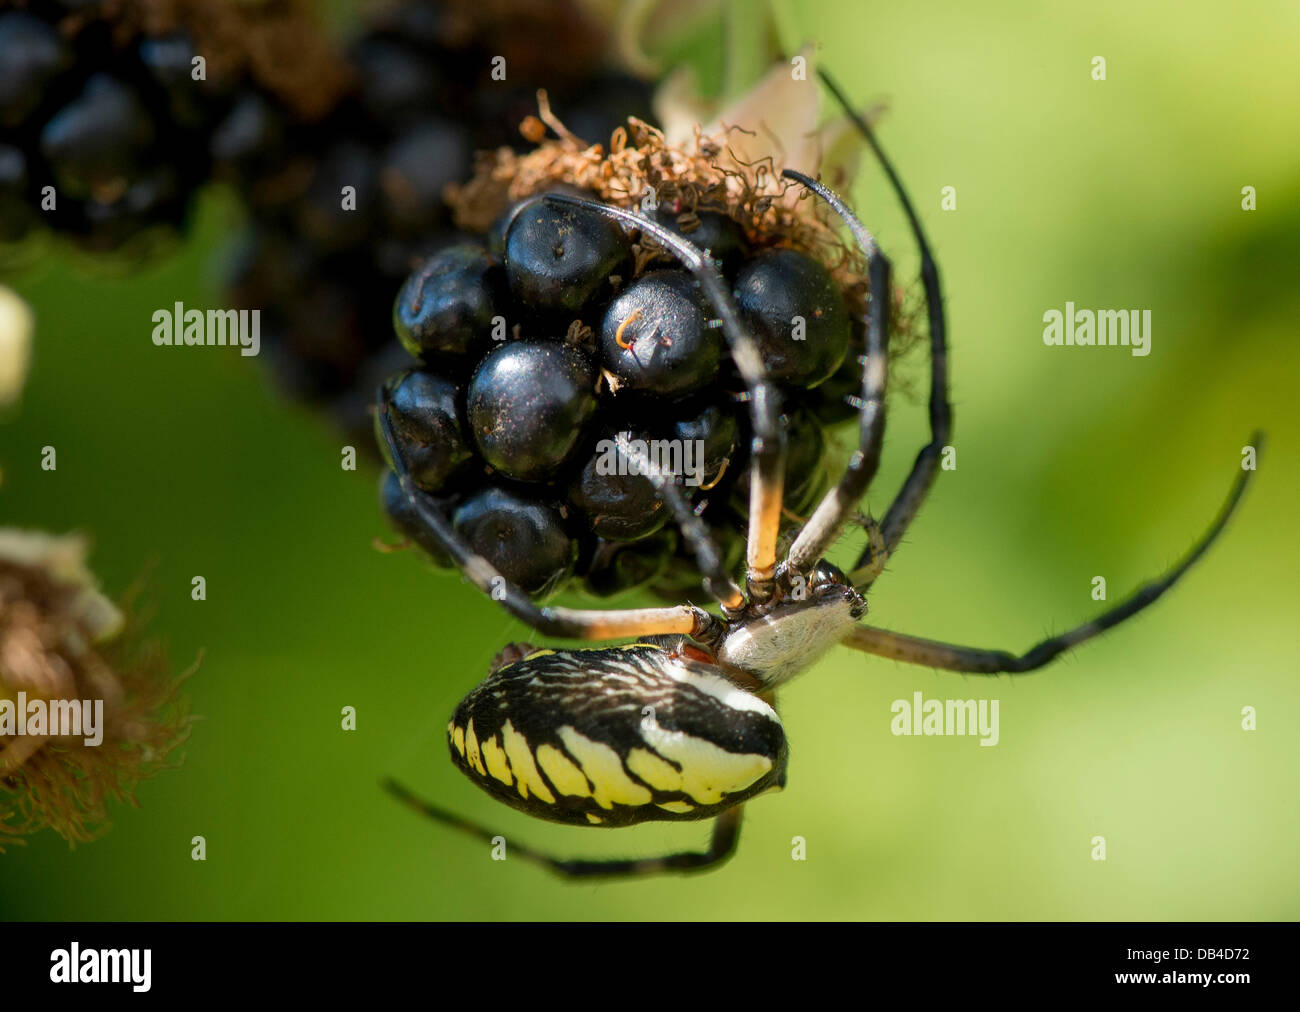 July 23, 2013 - Elkton, Oregon, U.S - A black and yellow garden spider (Argiope aurantia) clings to a ripe blackberry in a thicket along a country road in rural Douglas County, Ore., near Elkton. Also known as the writing spider or corn spider, they are considered harmless to humans. (Credit Image: © Robin Loznak/ZUMAPRESS.com) Stock Photo